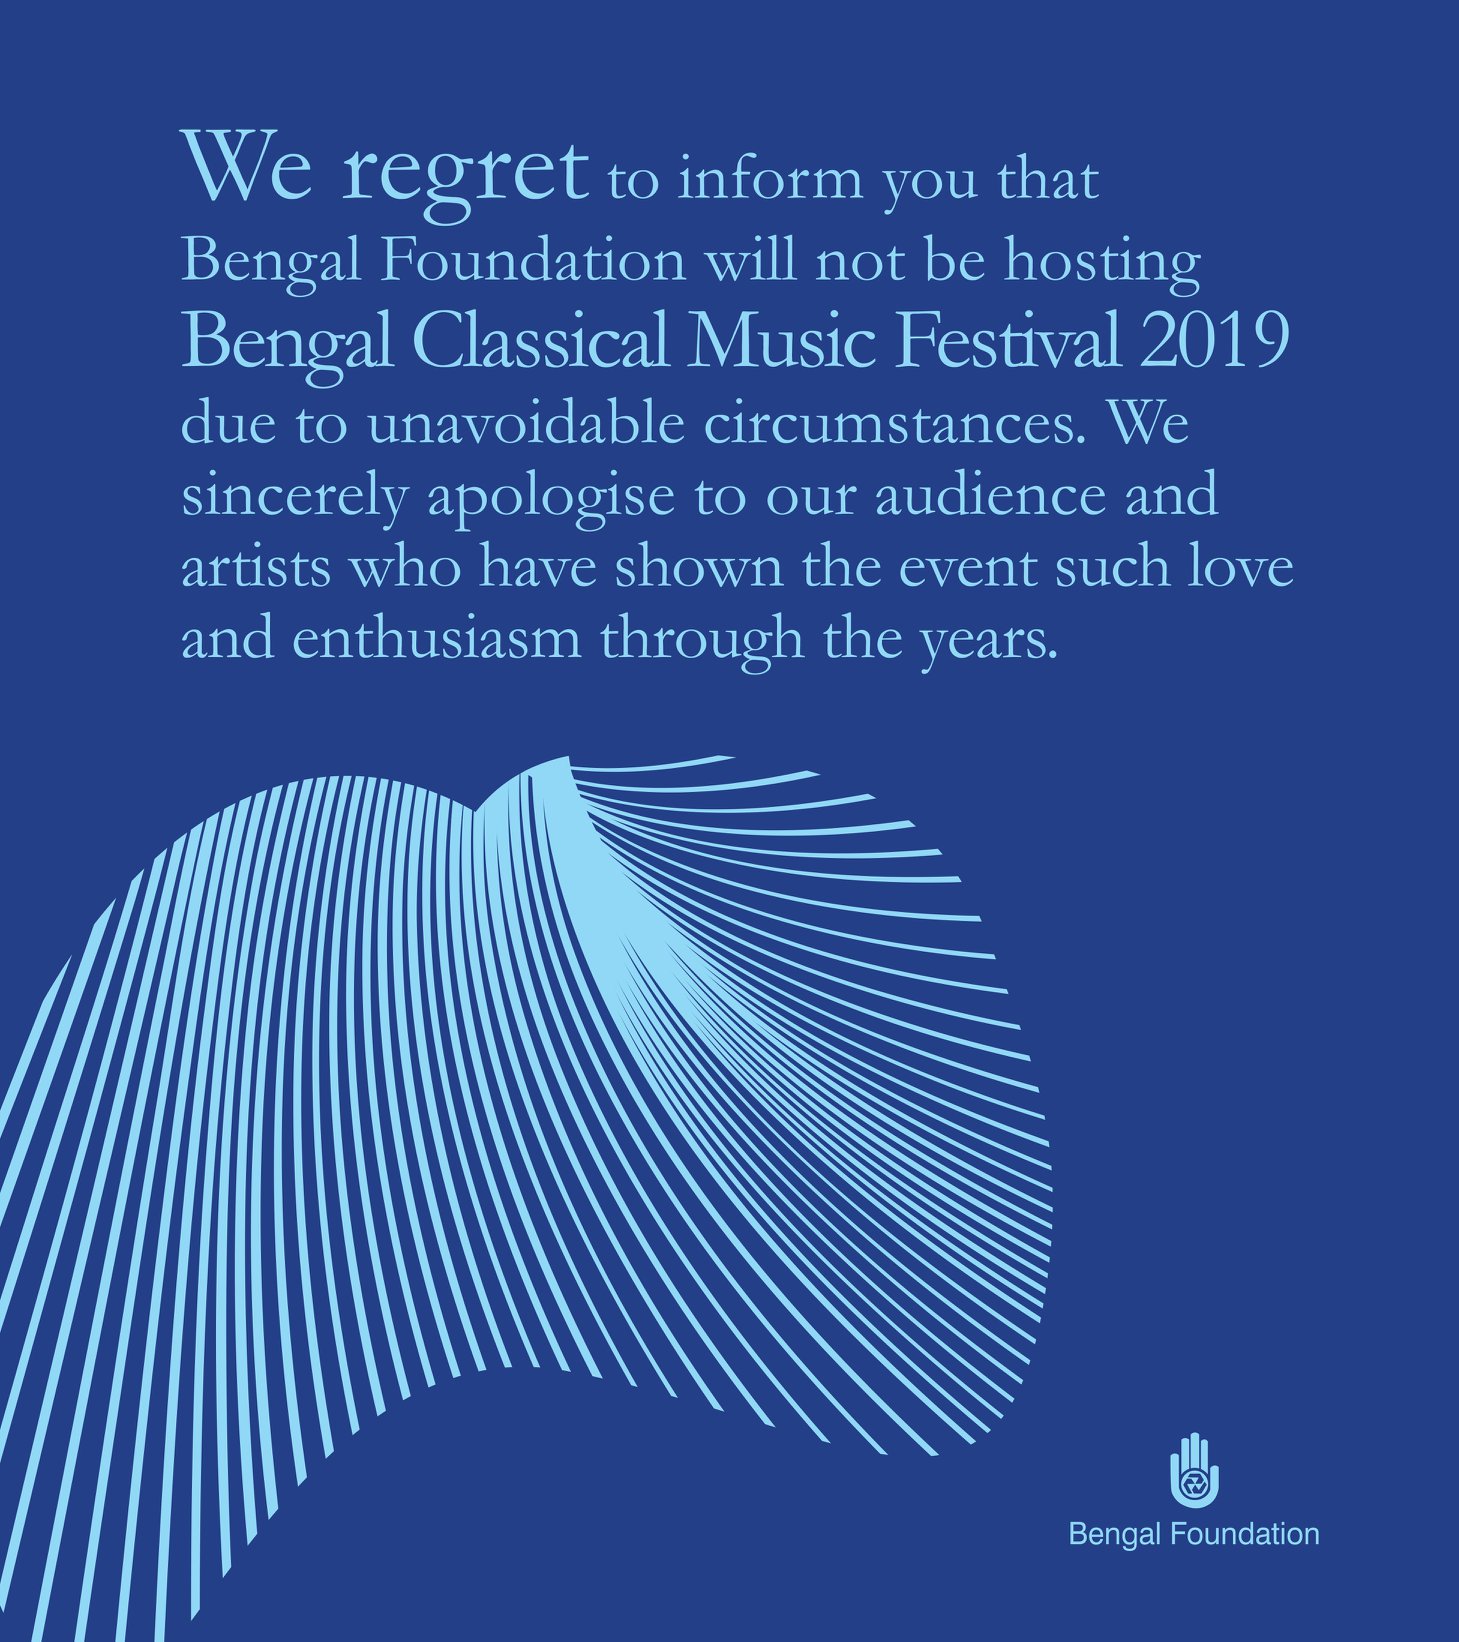 Bengal Classical Music Fest – Cancelled Again